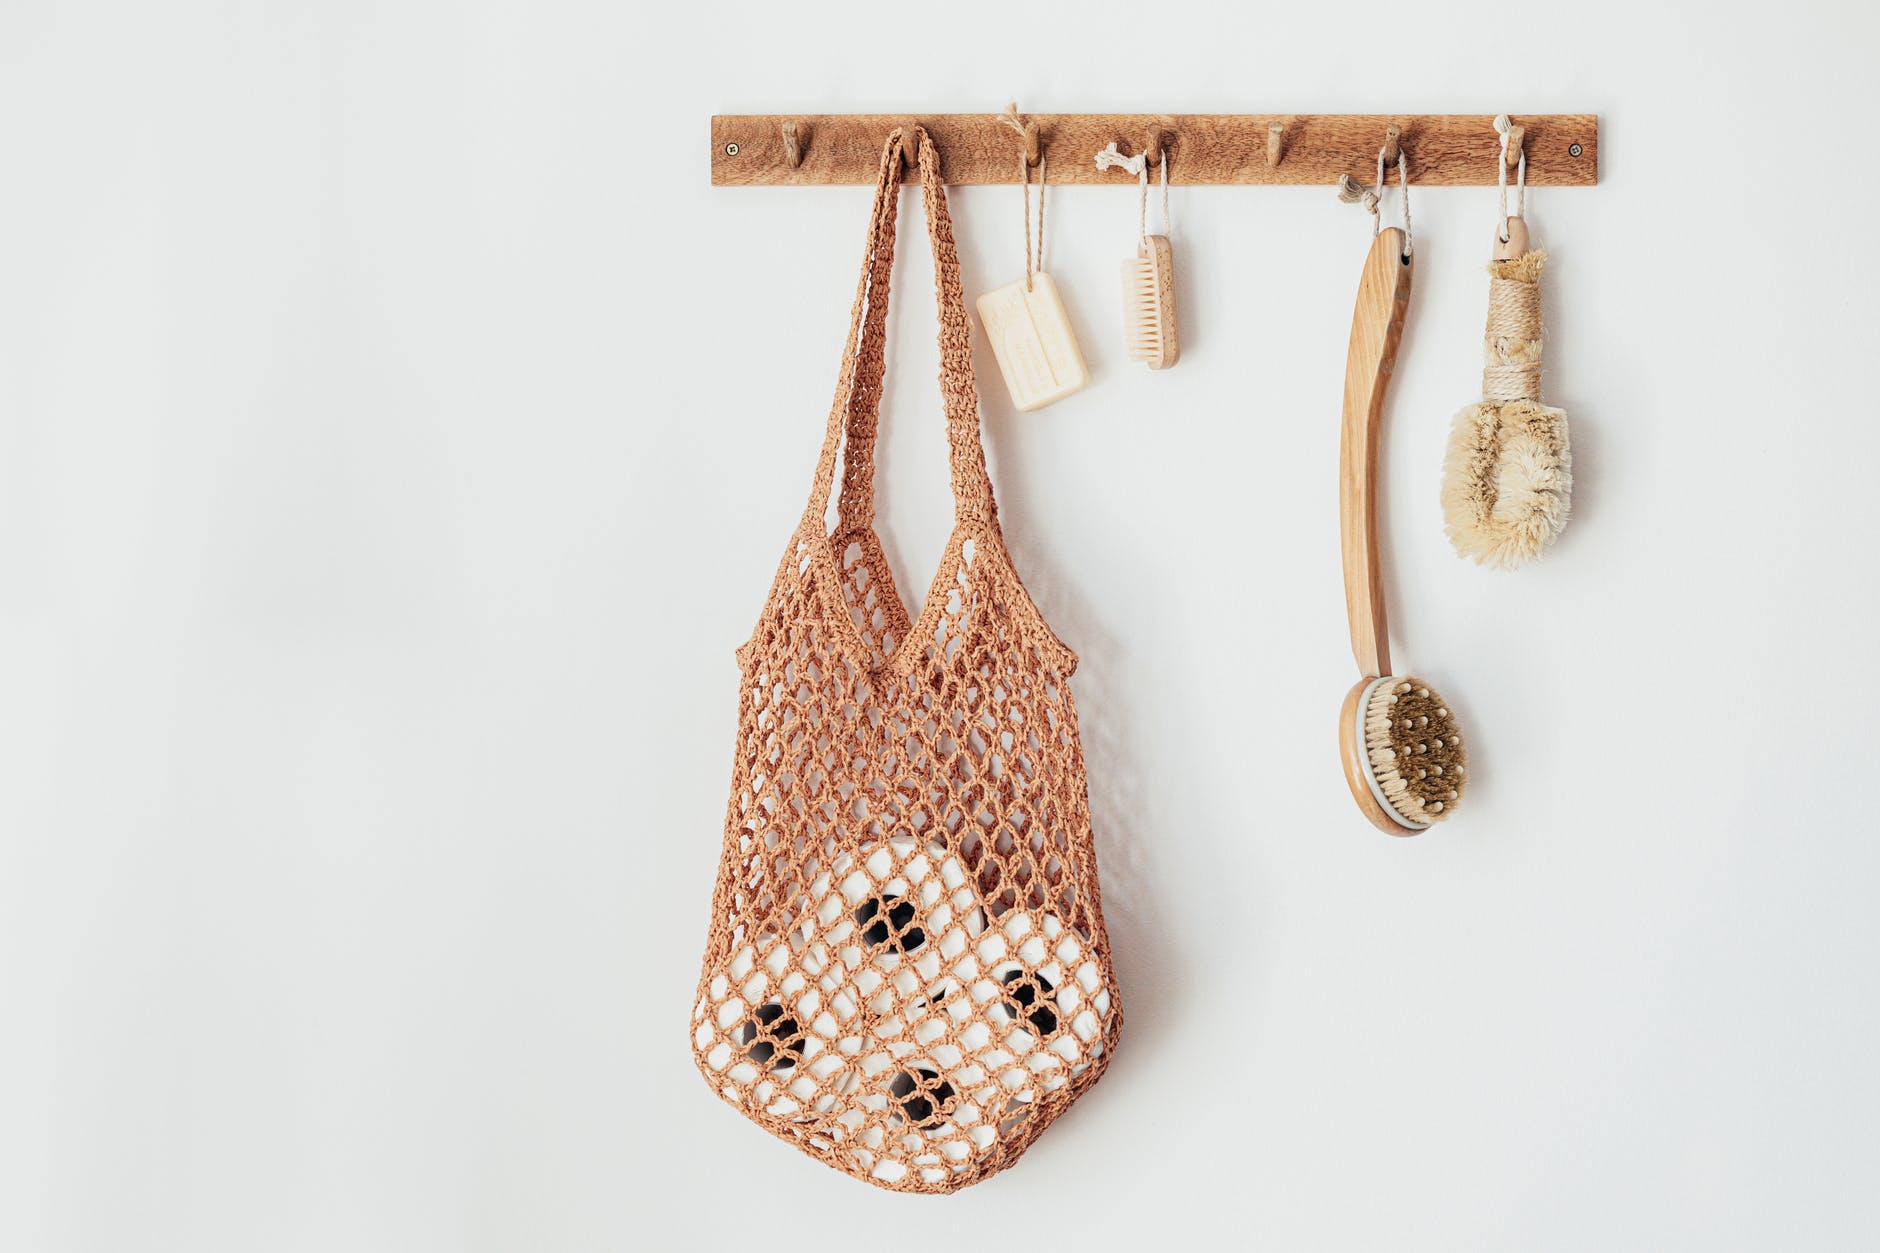 wooden hanger with body brushes and toiletries on white wall